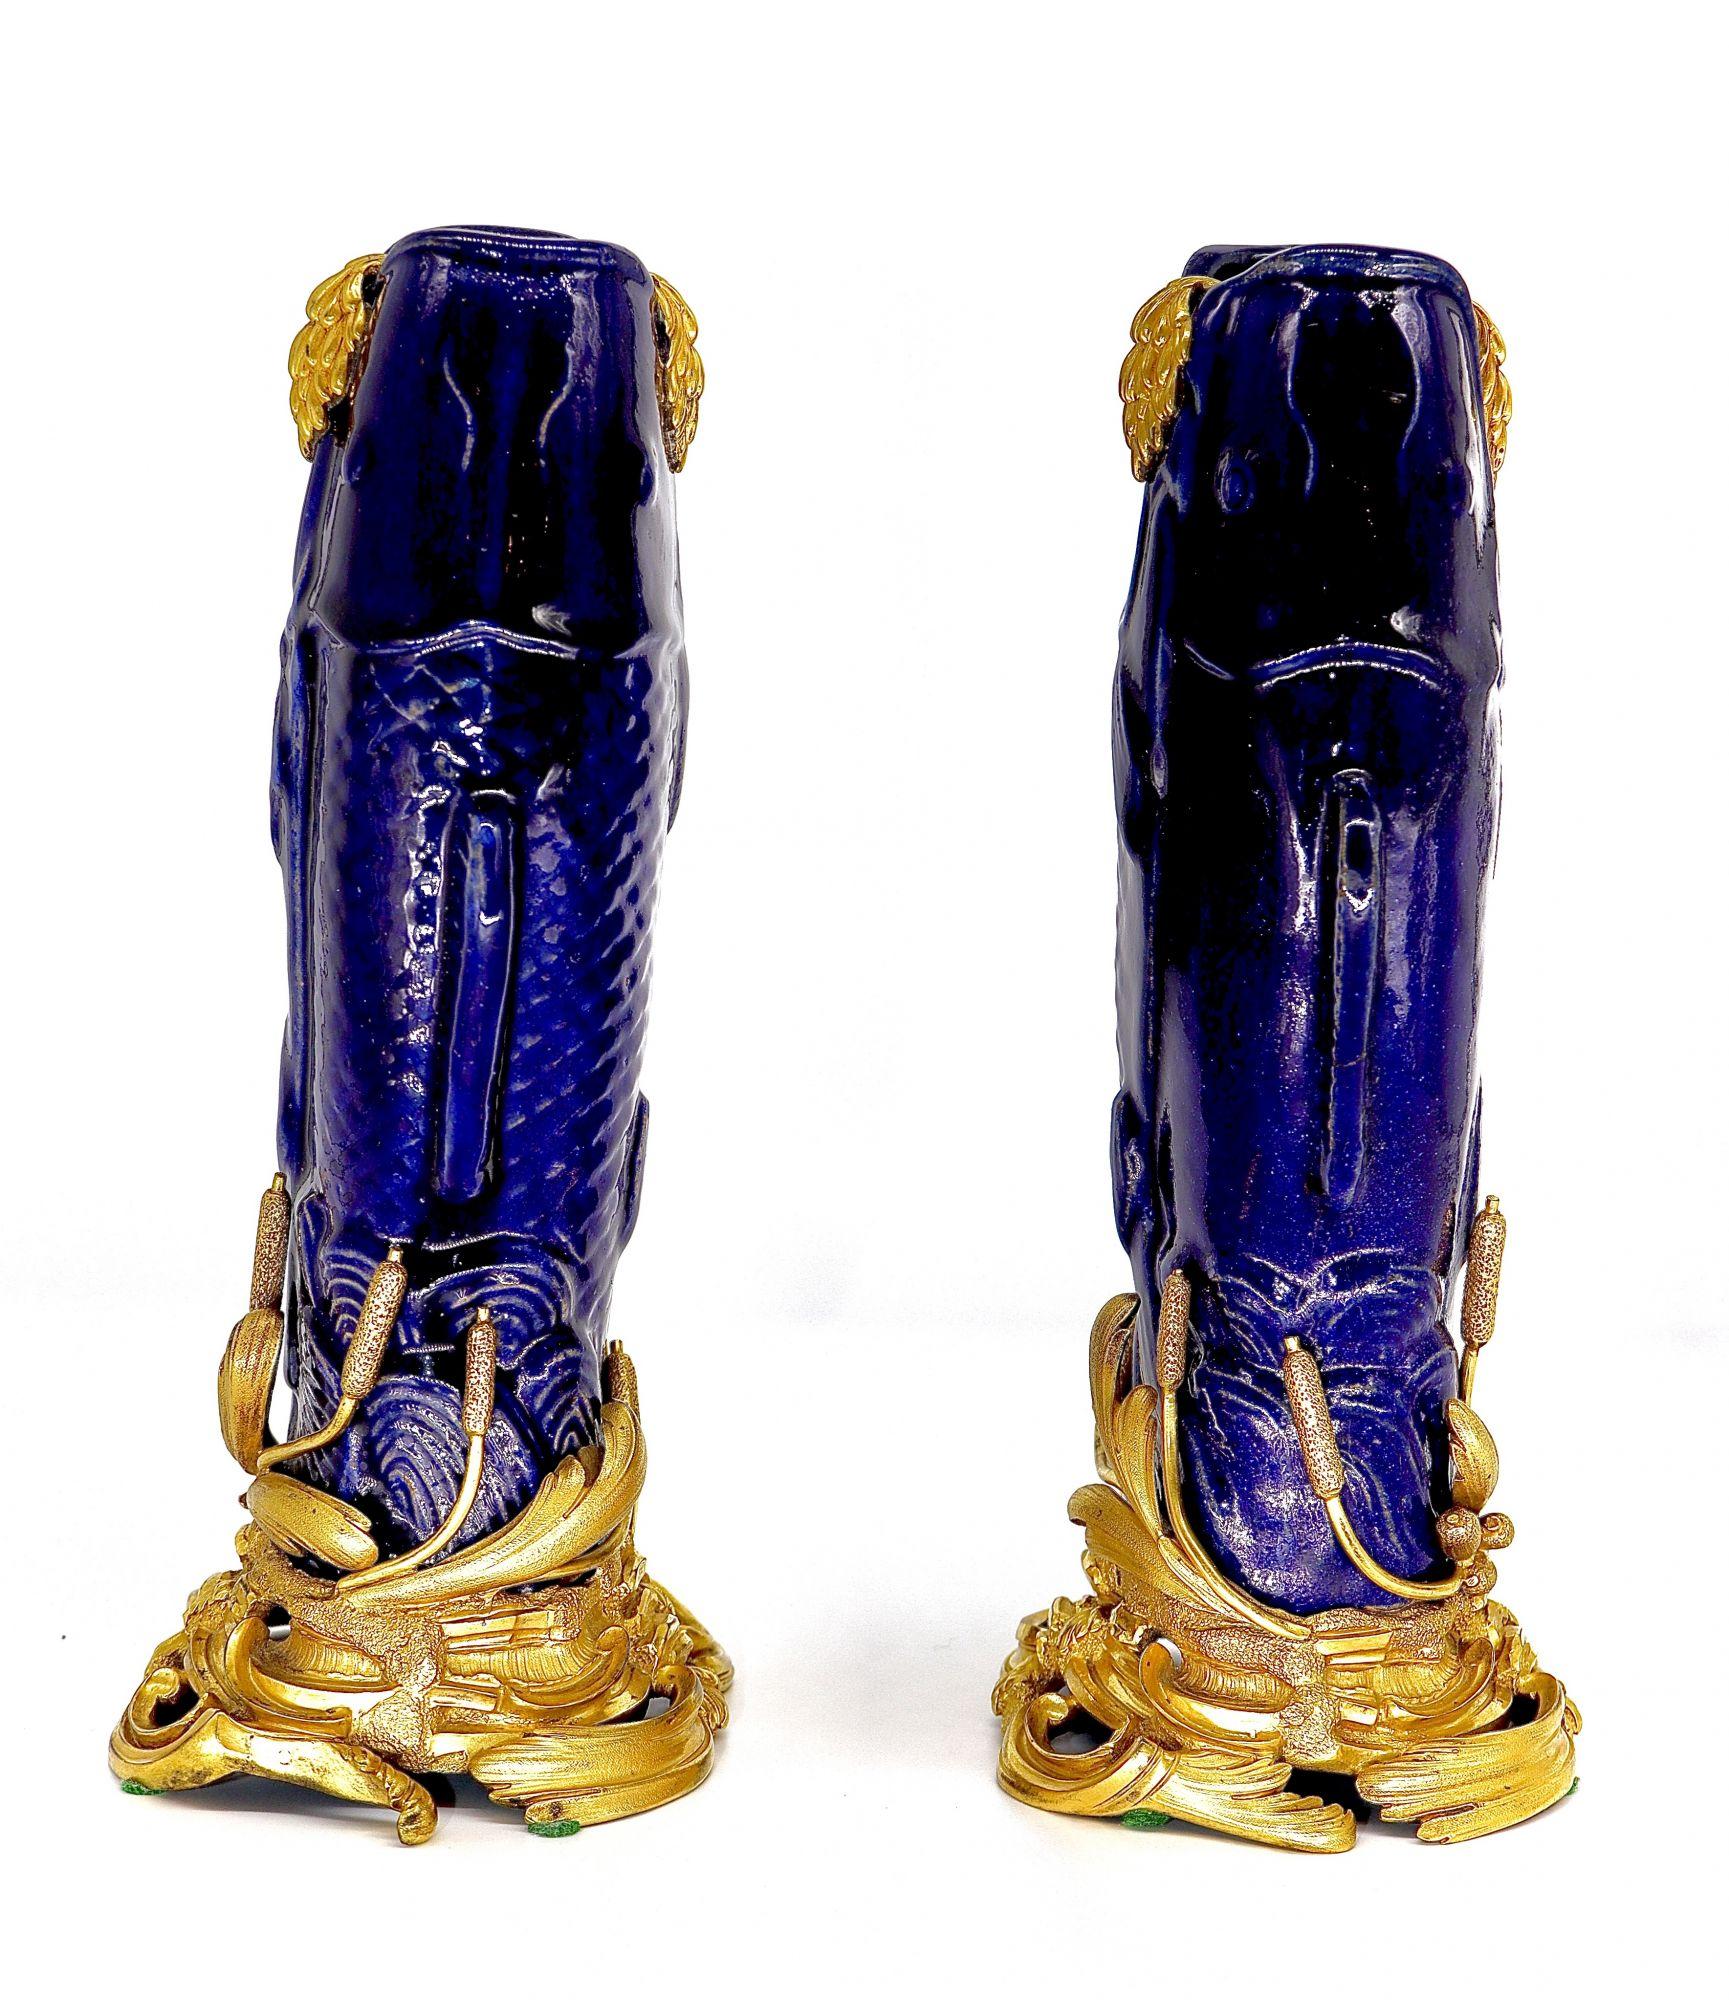 Carved 1750 Circa, a Pair of Mounted Porcelain Karp Shaped Vases For Sale